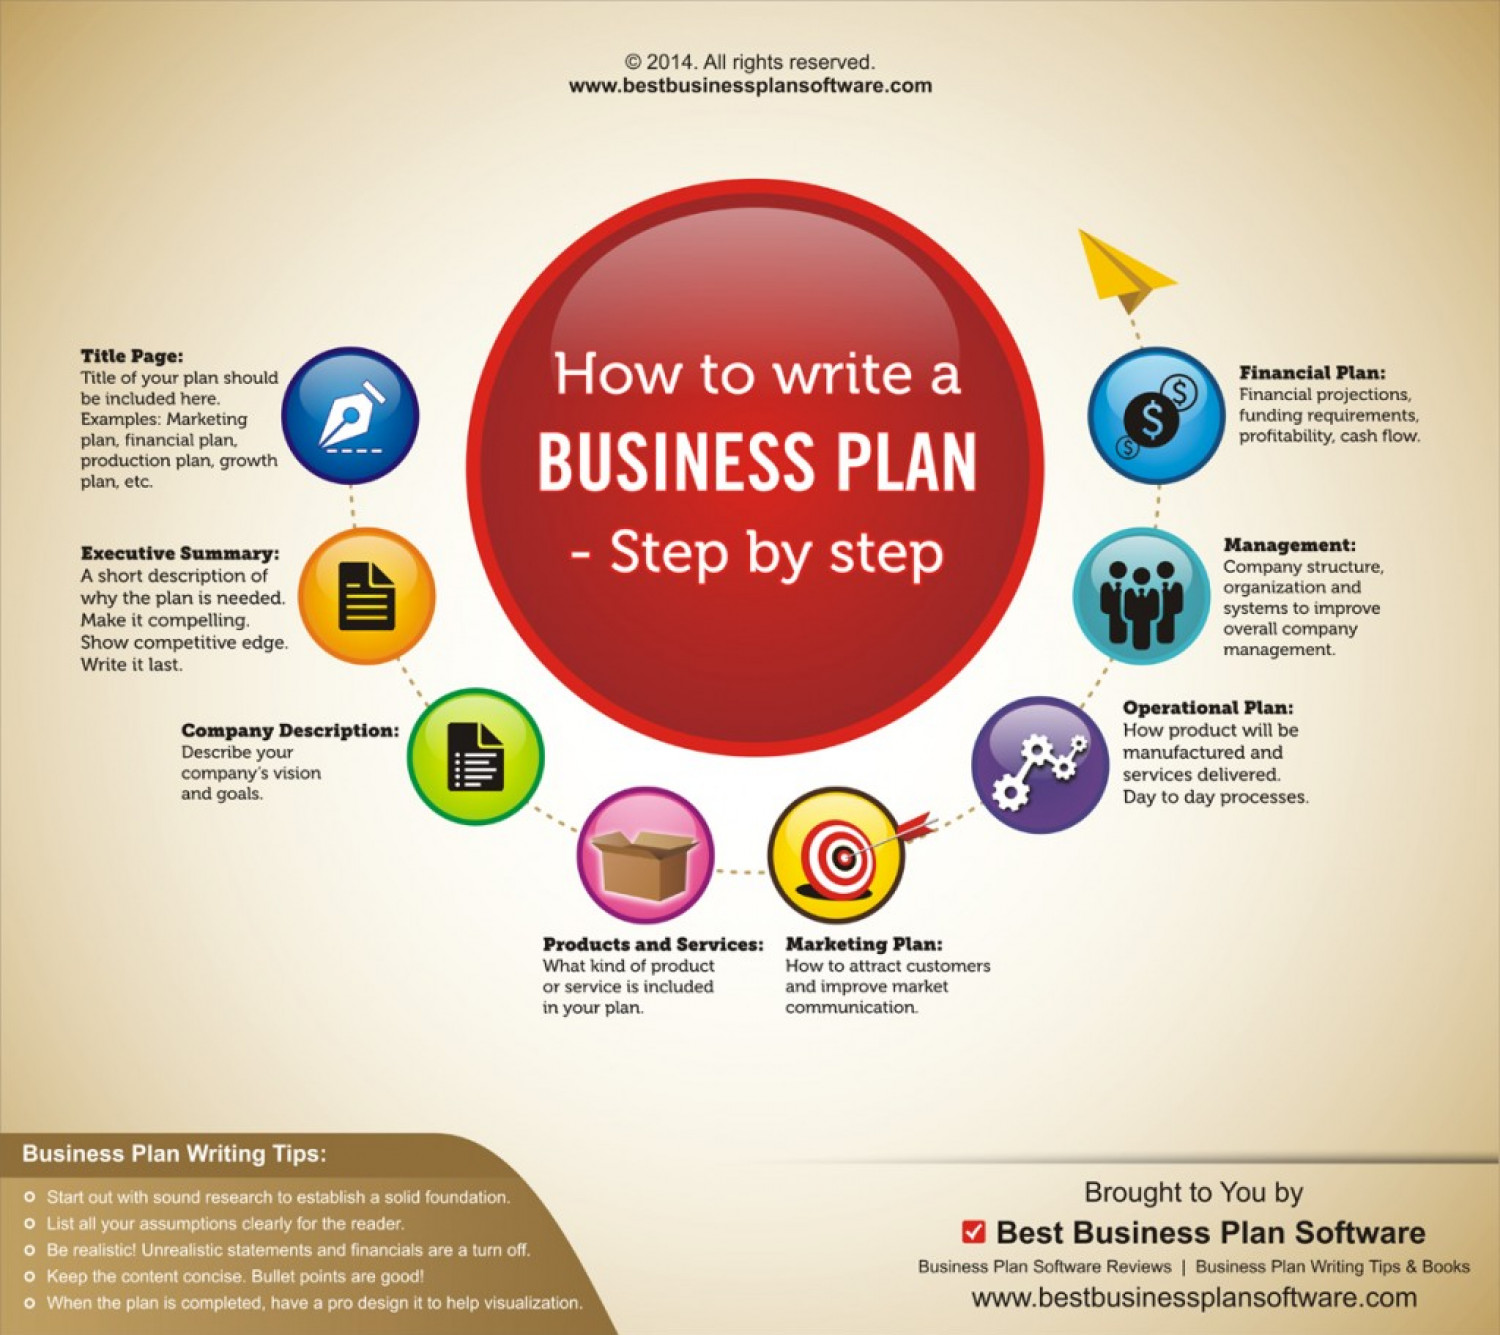 6 Easy Steps To Make Your Own Marketing Plan [Infographic] ~ Visualistan